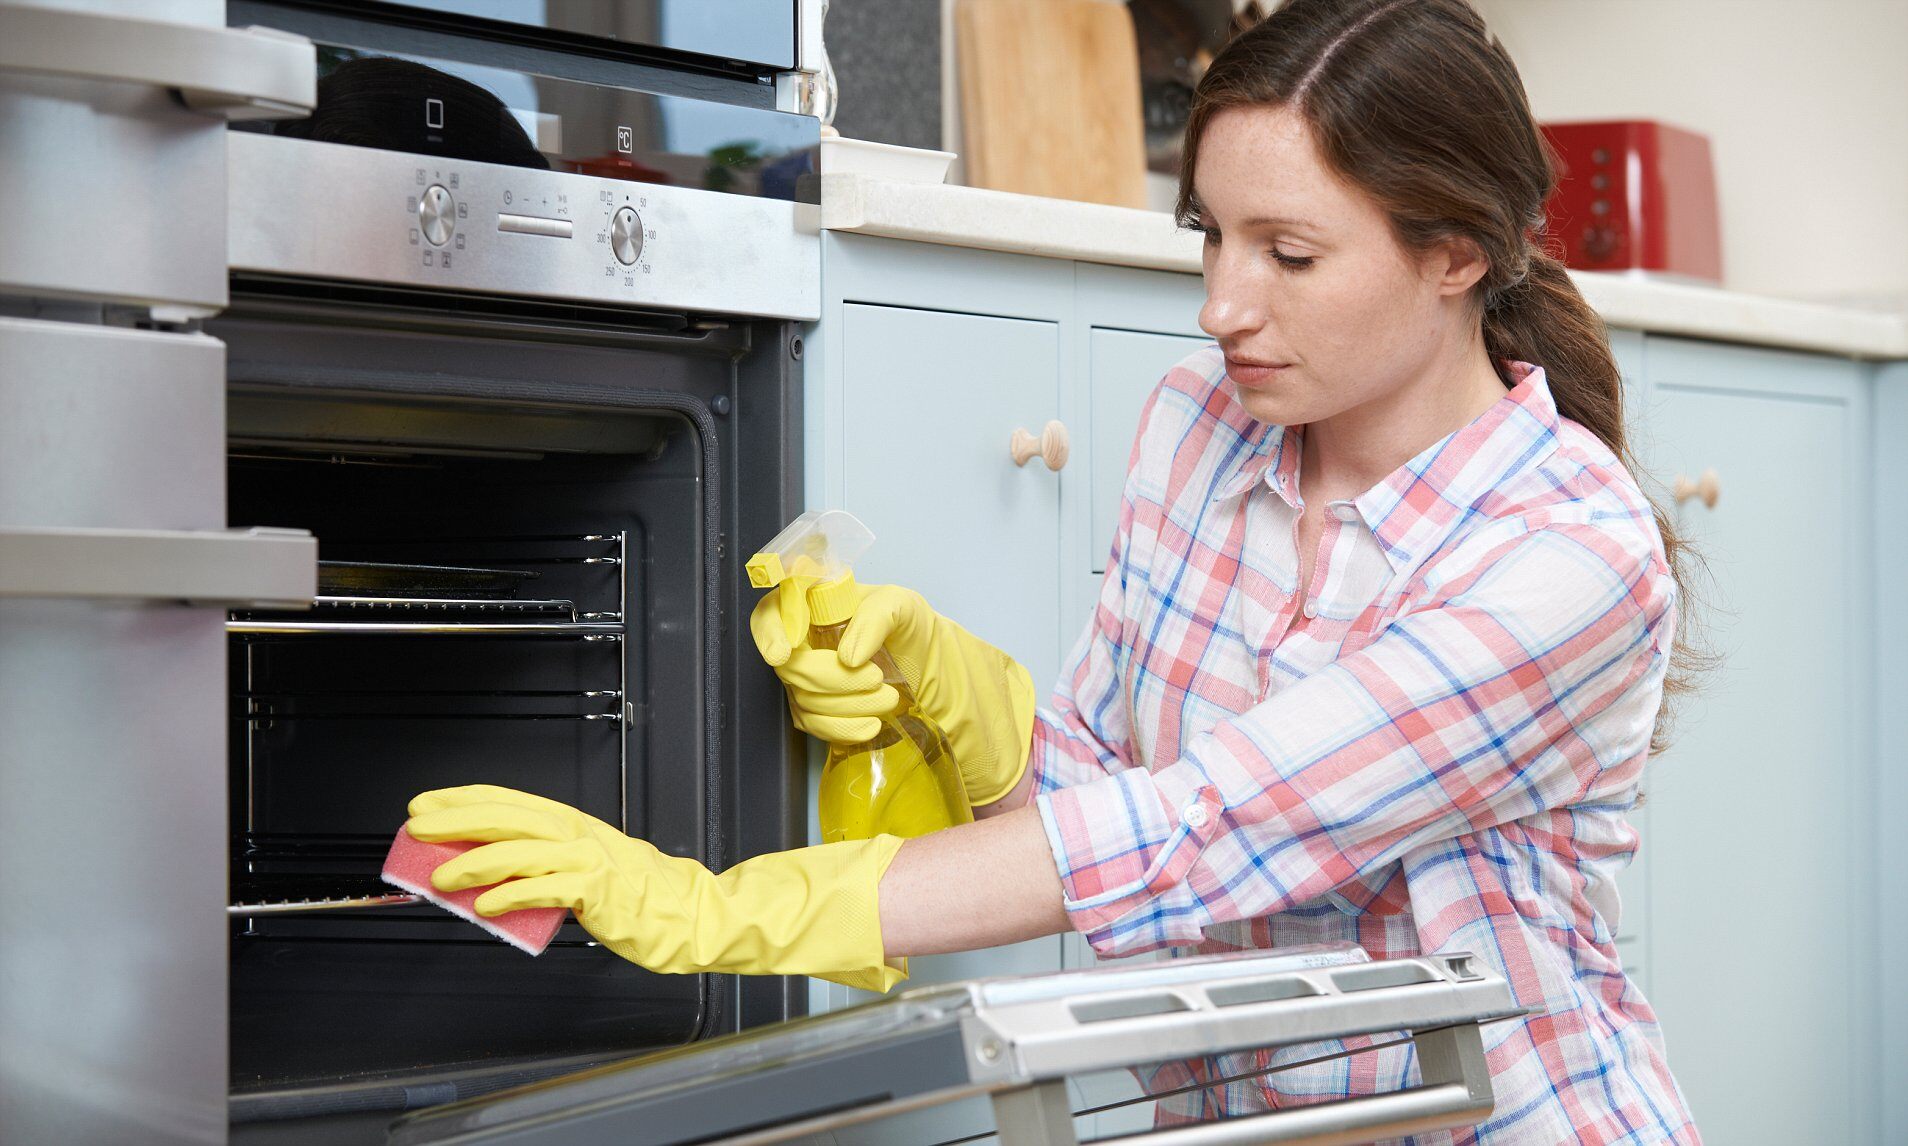 3 Tips For Cleaning Your Oven To Keep It Sparkling